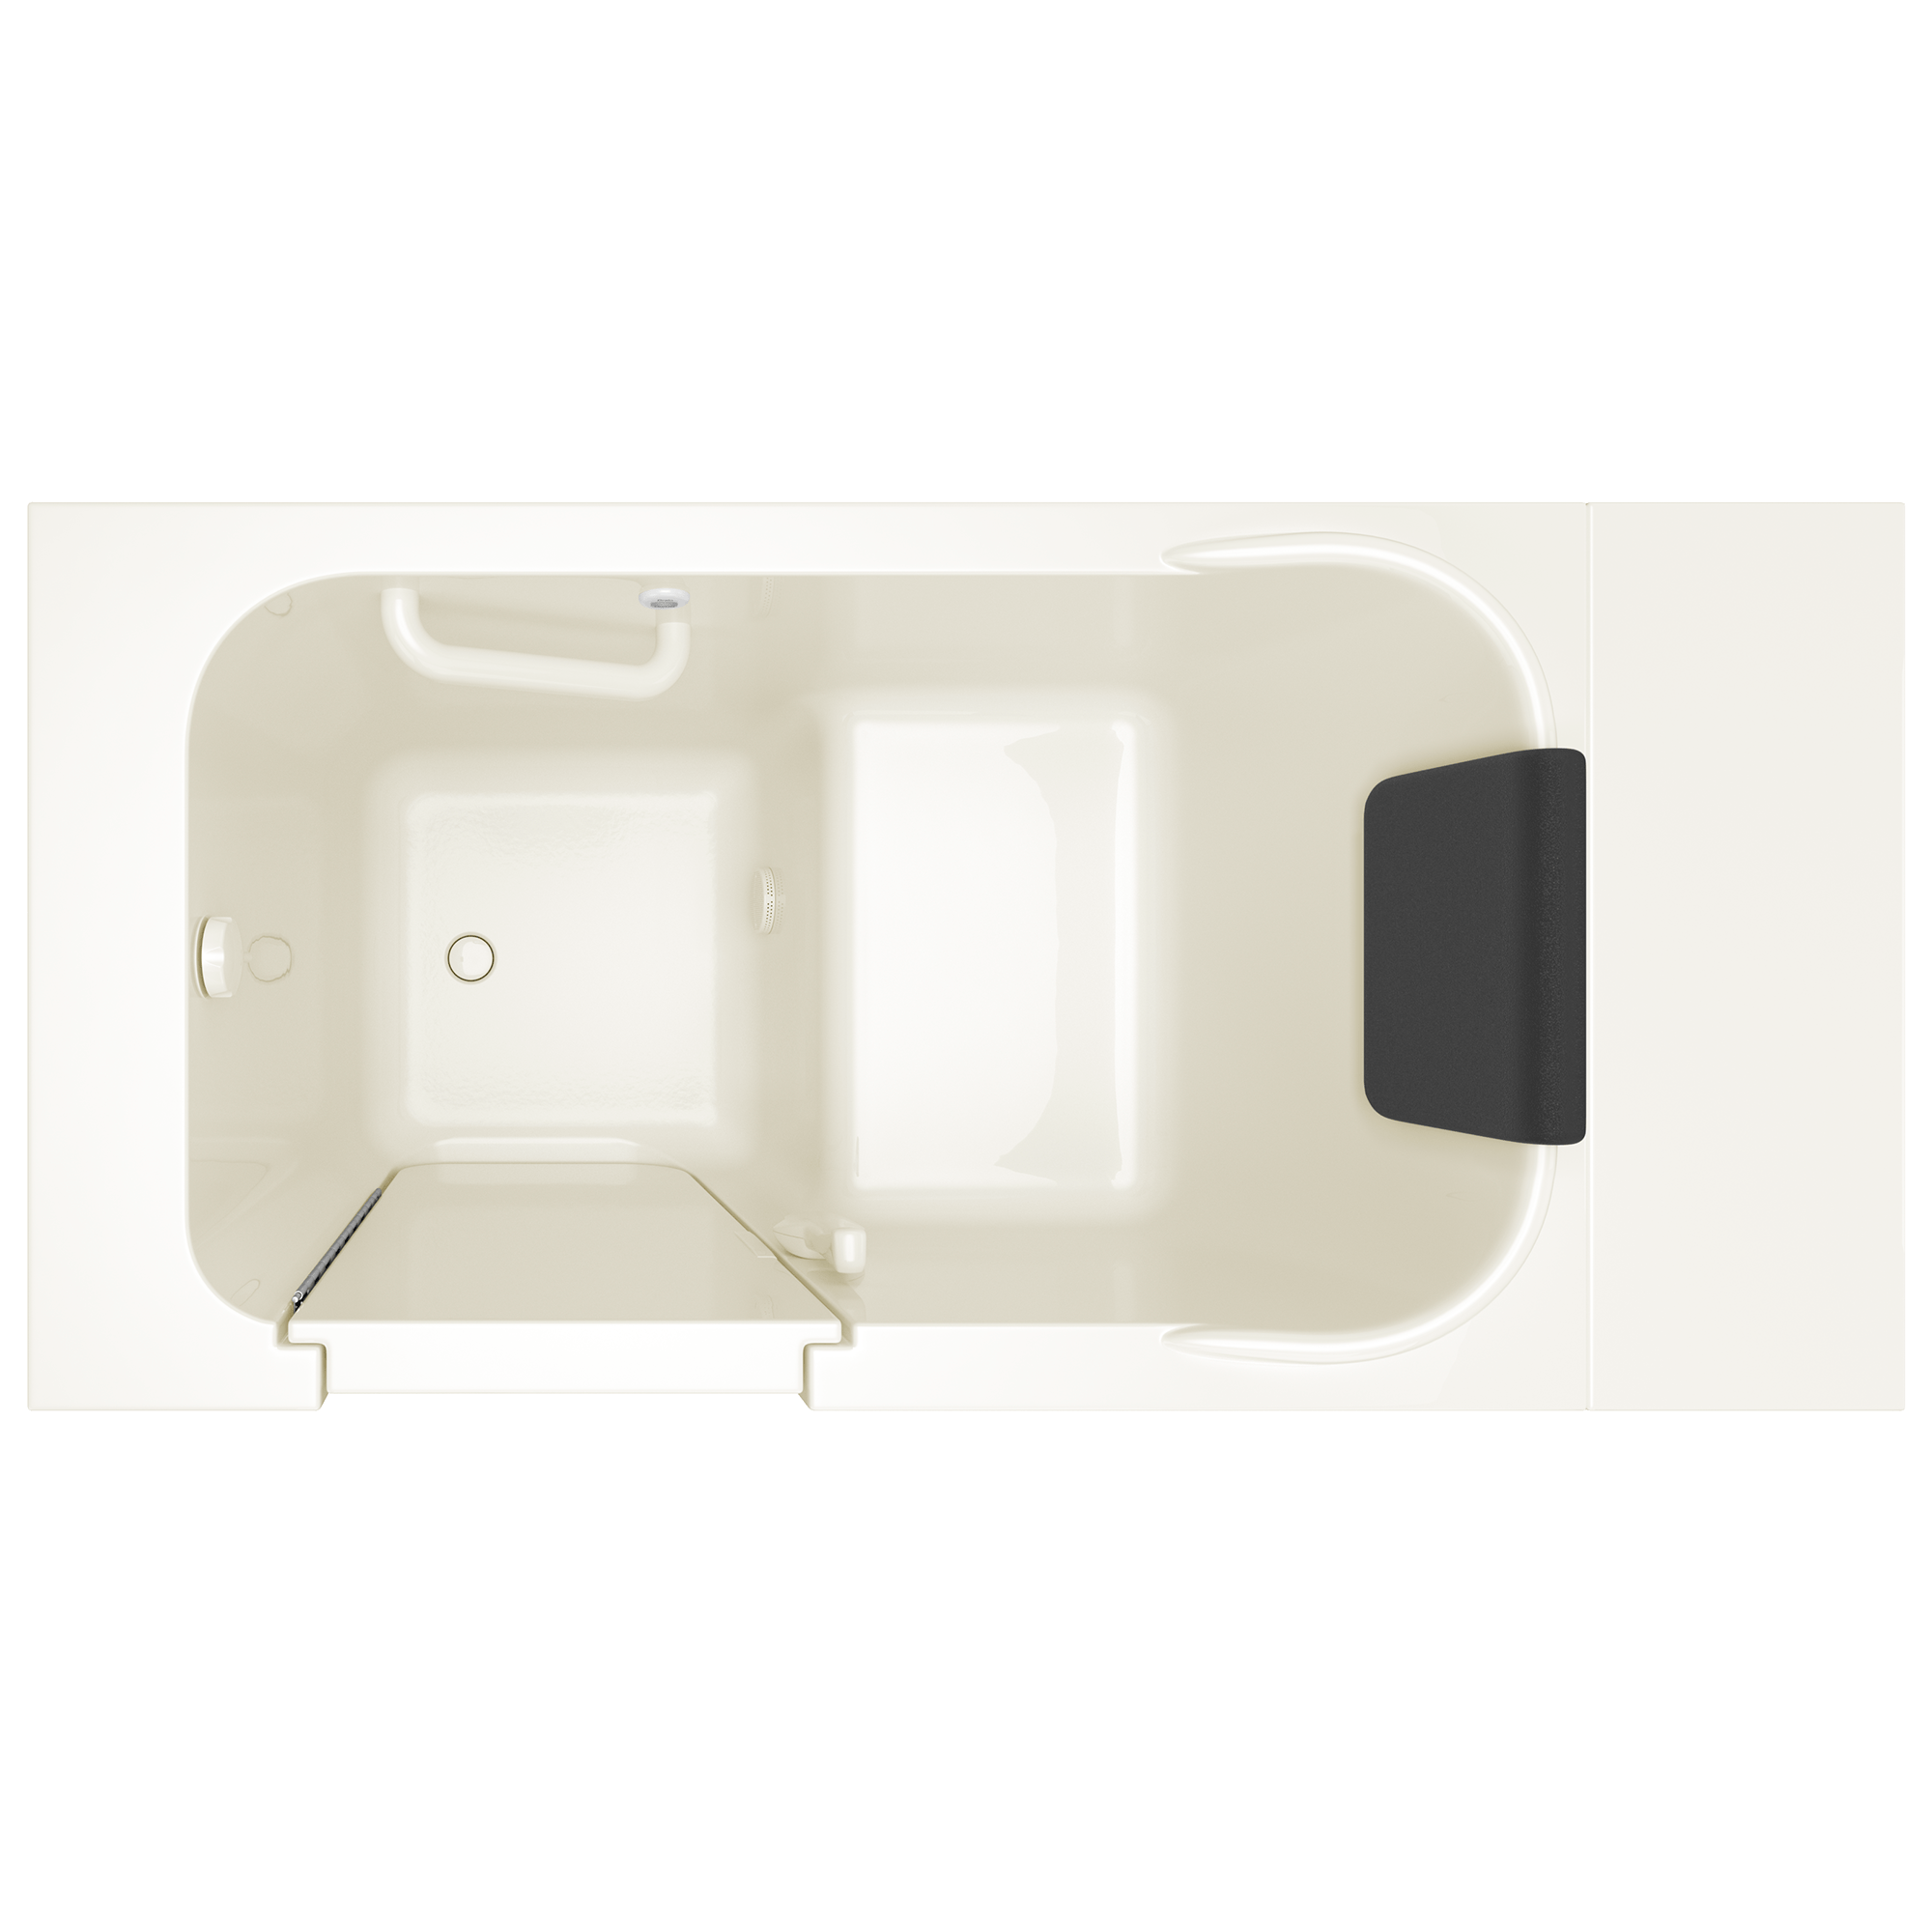 Gelcoat Premium Series 28 x 48-Inch Walk-in Tub With Soaker System - Left-Hand Drain